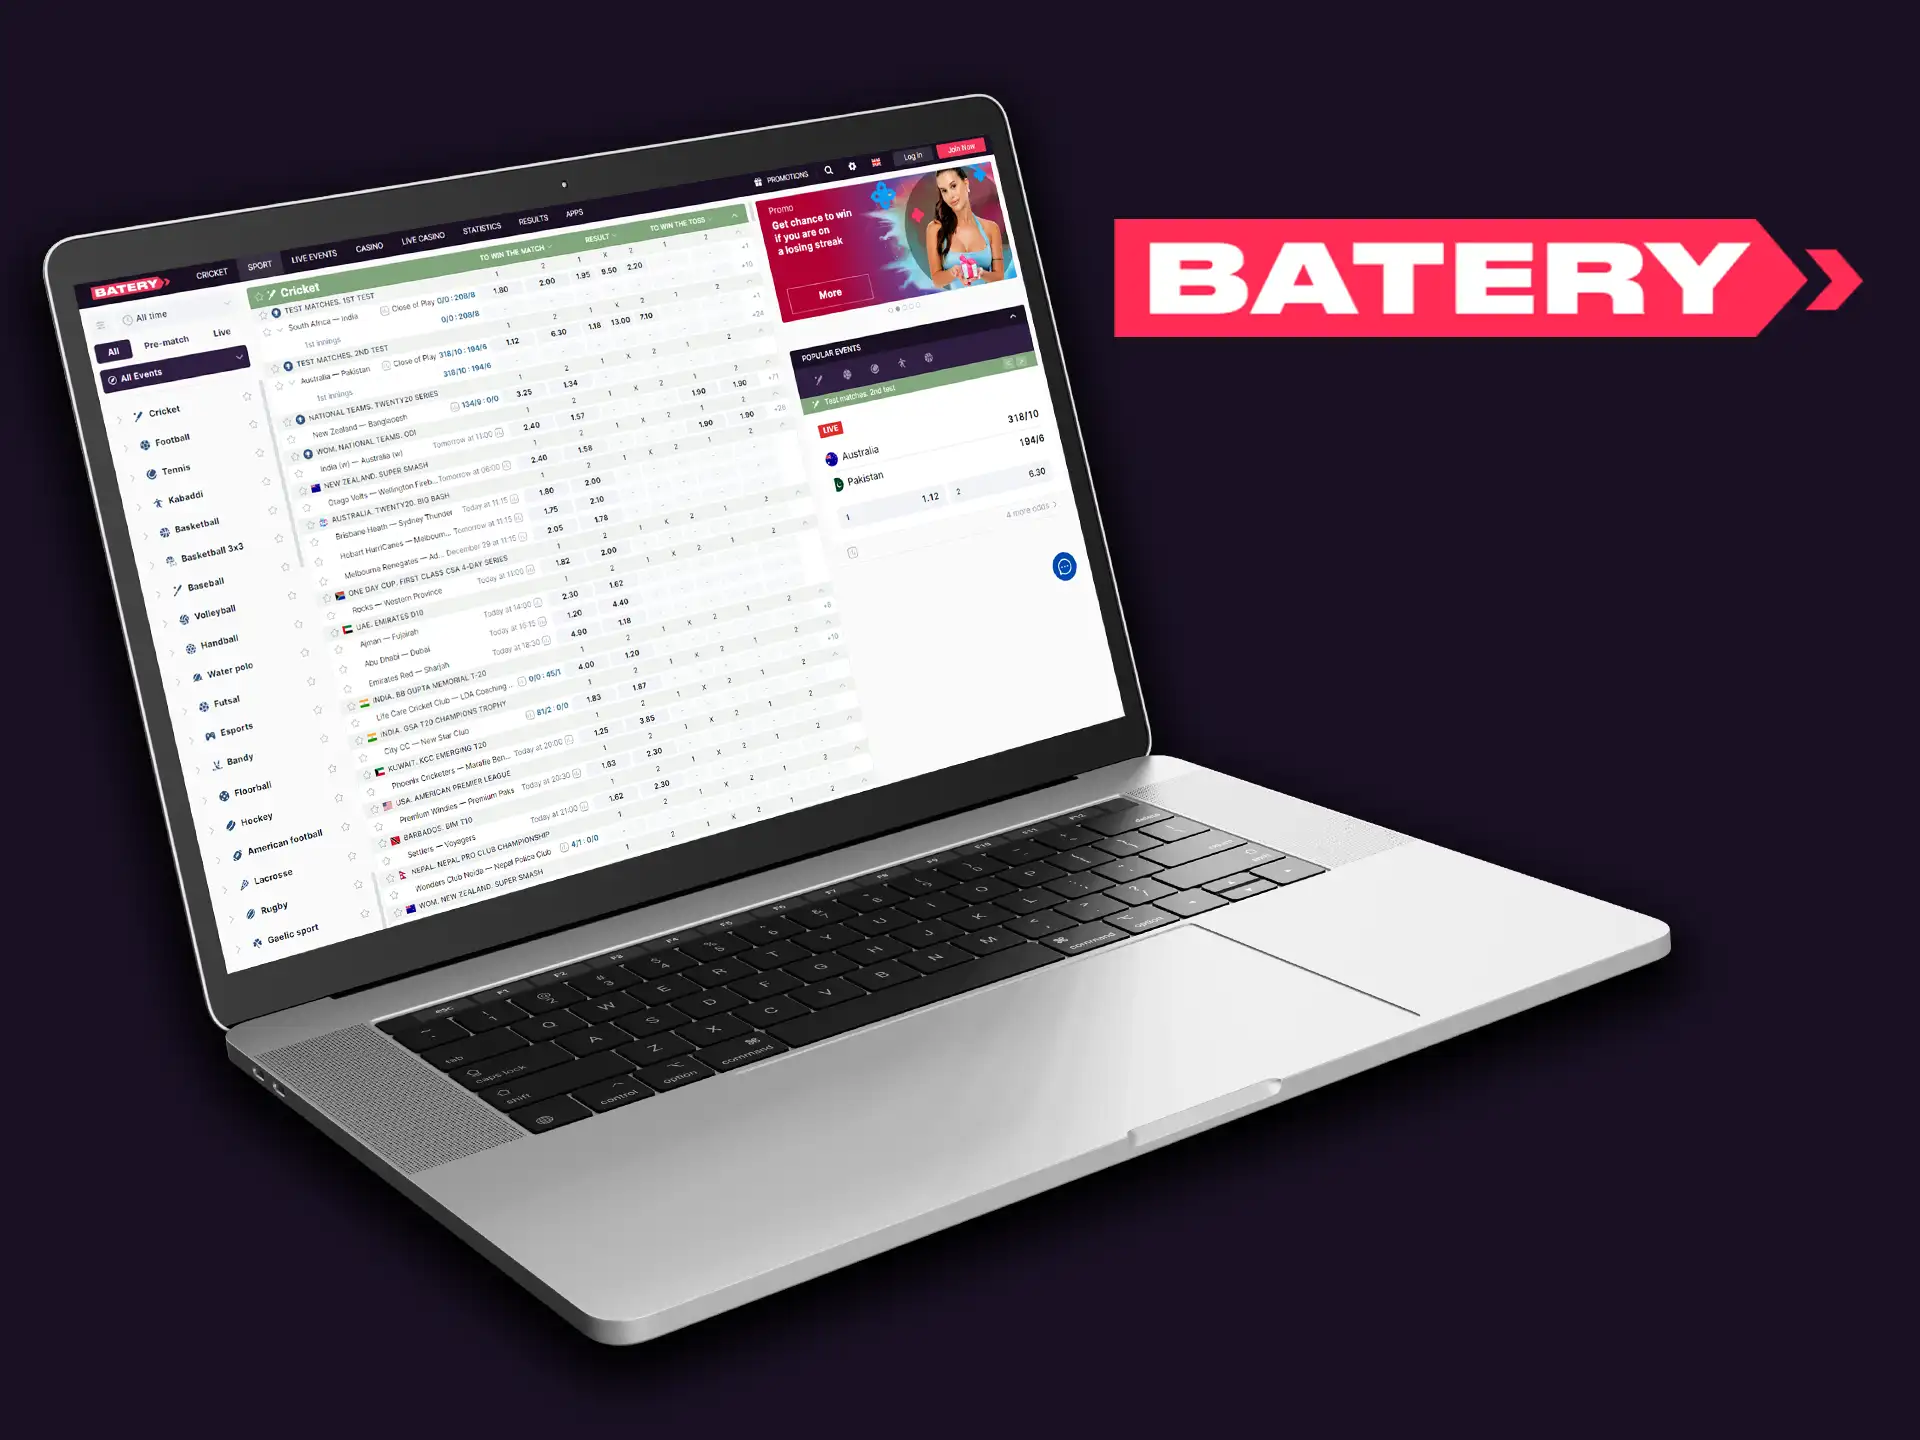 You can find sports betting and casinos on the Batery platform.